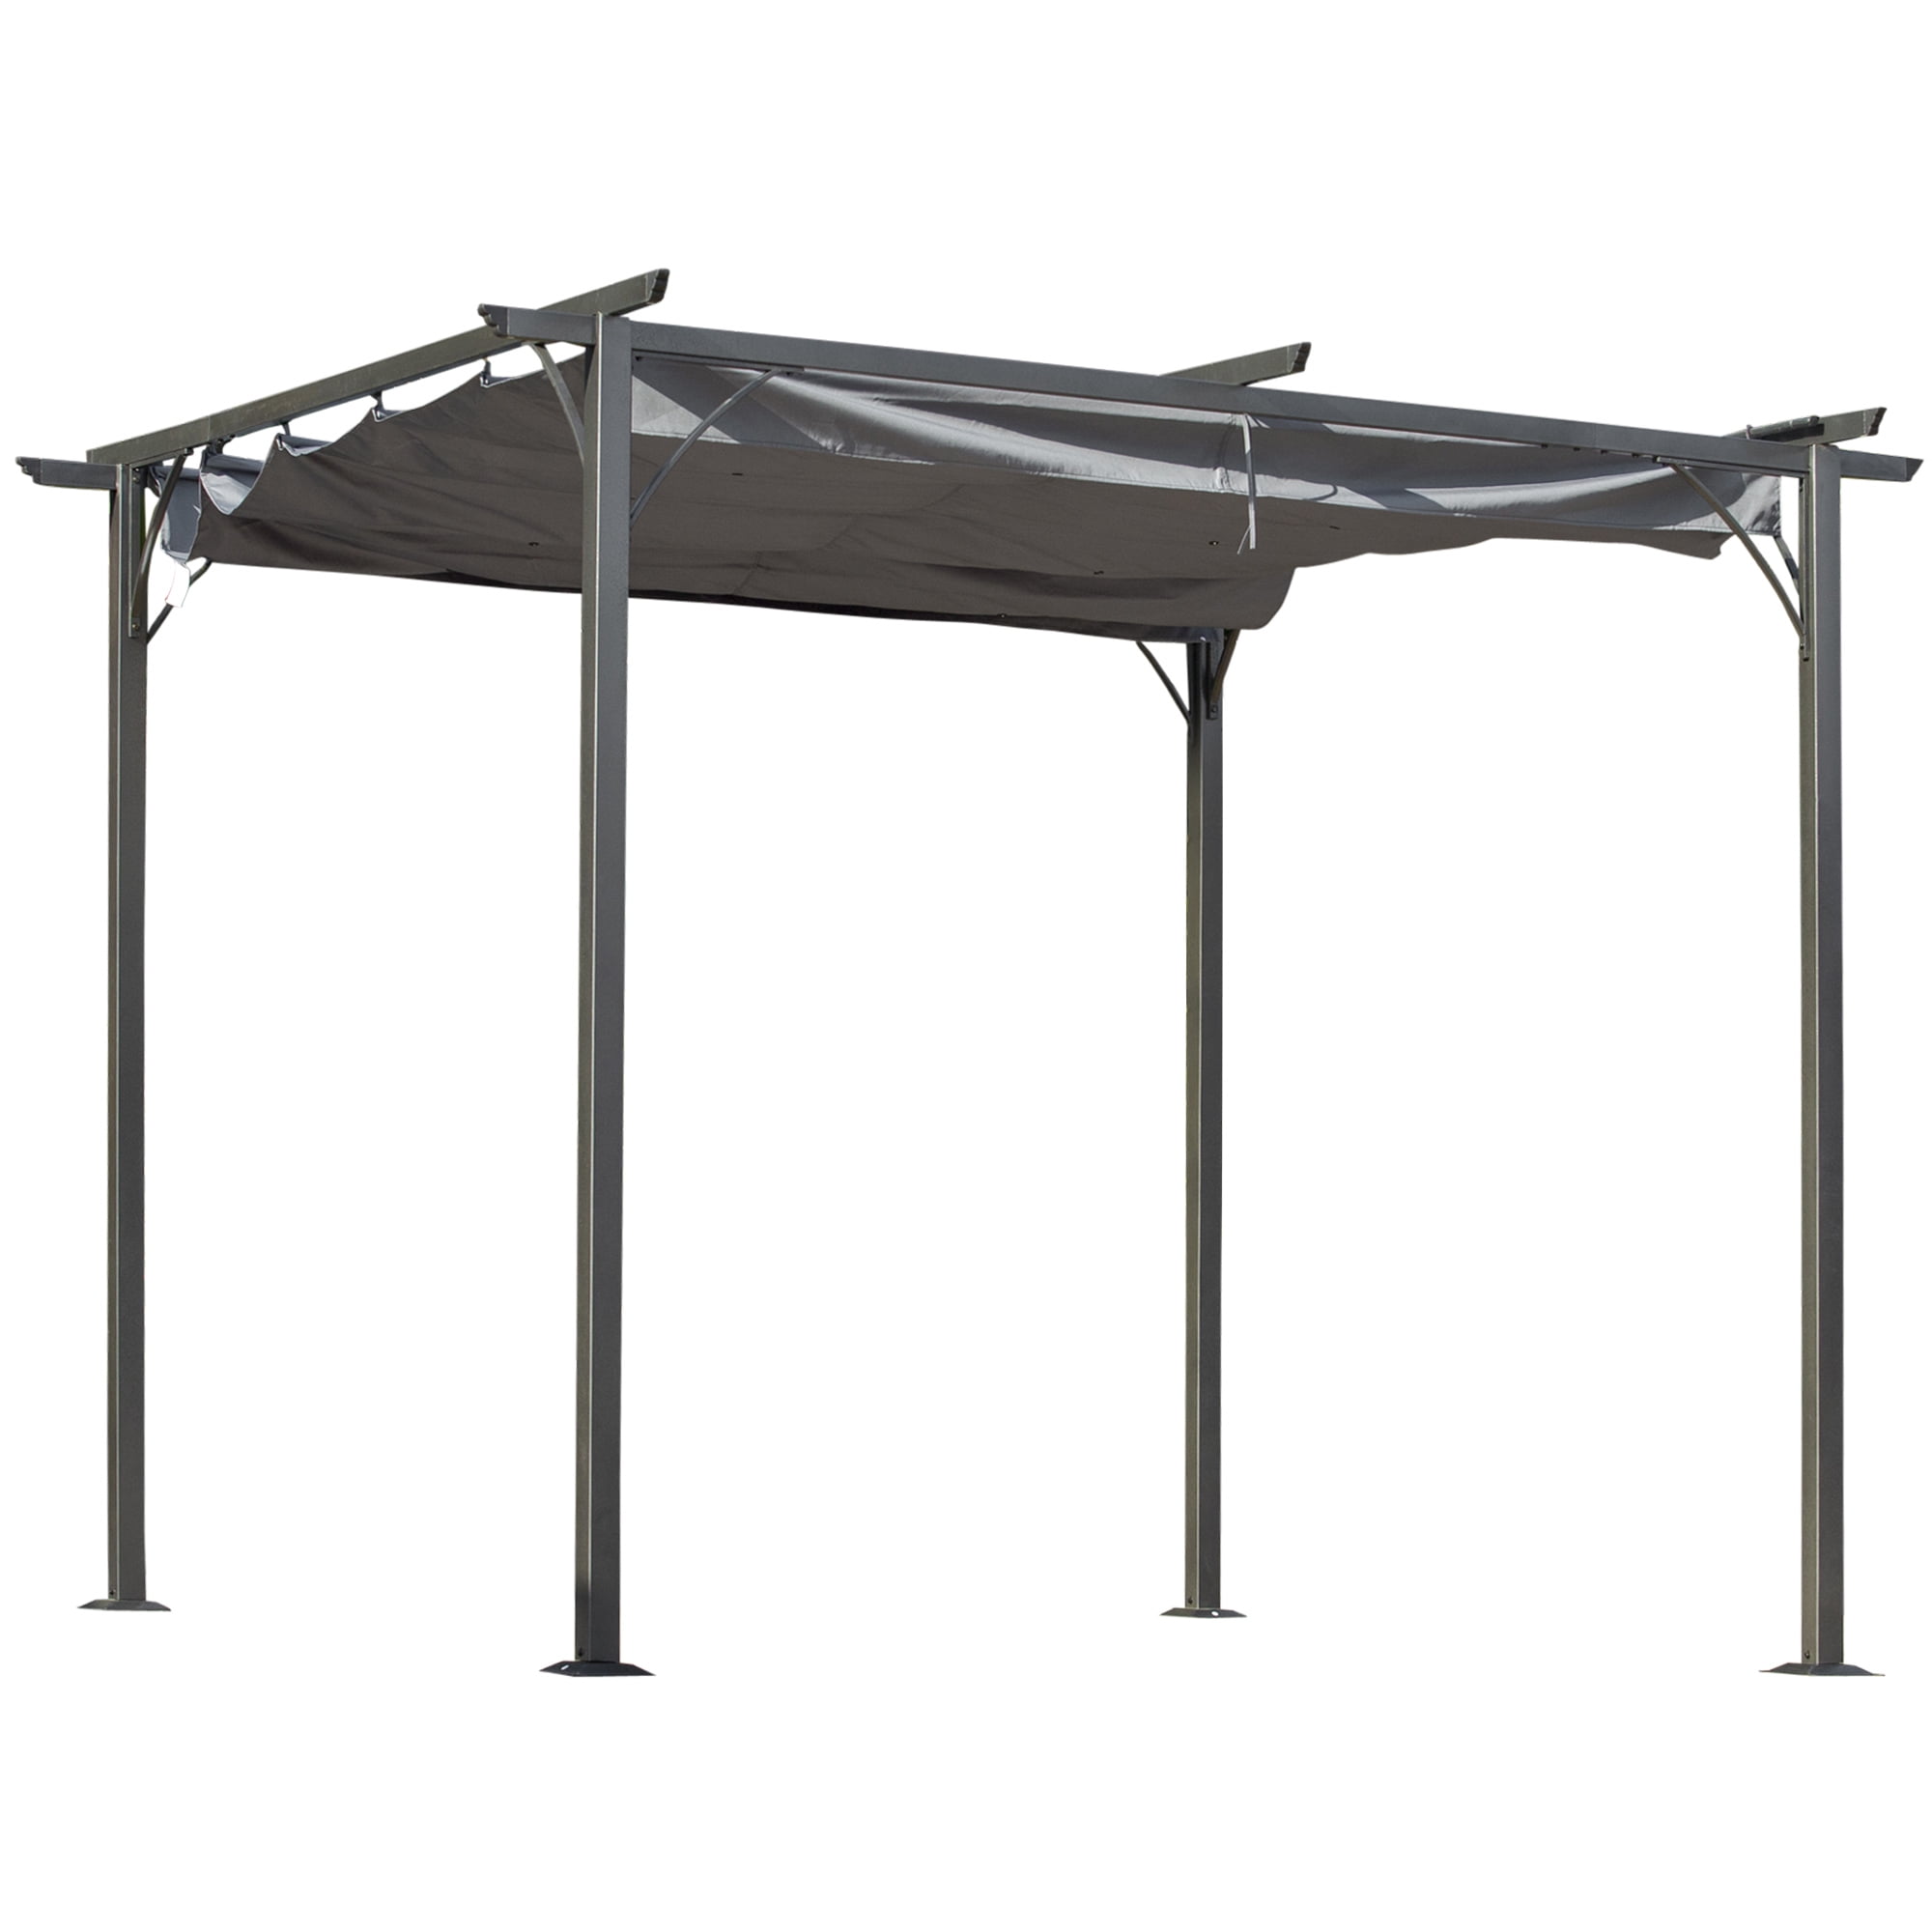 Gardens Brown Includes Ground Studs and Expansion Screws Outdoor Pergola with Sun and Rain-Proof Canopy Patios HAPPATIO 10' X 13' Pergola Retractable Pergola Canopy for Backyards 